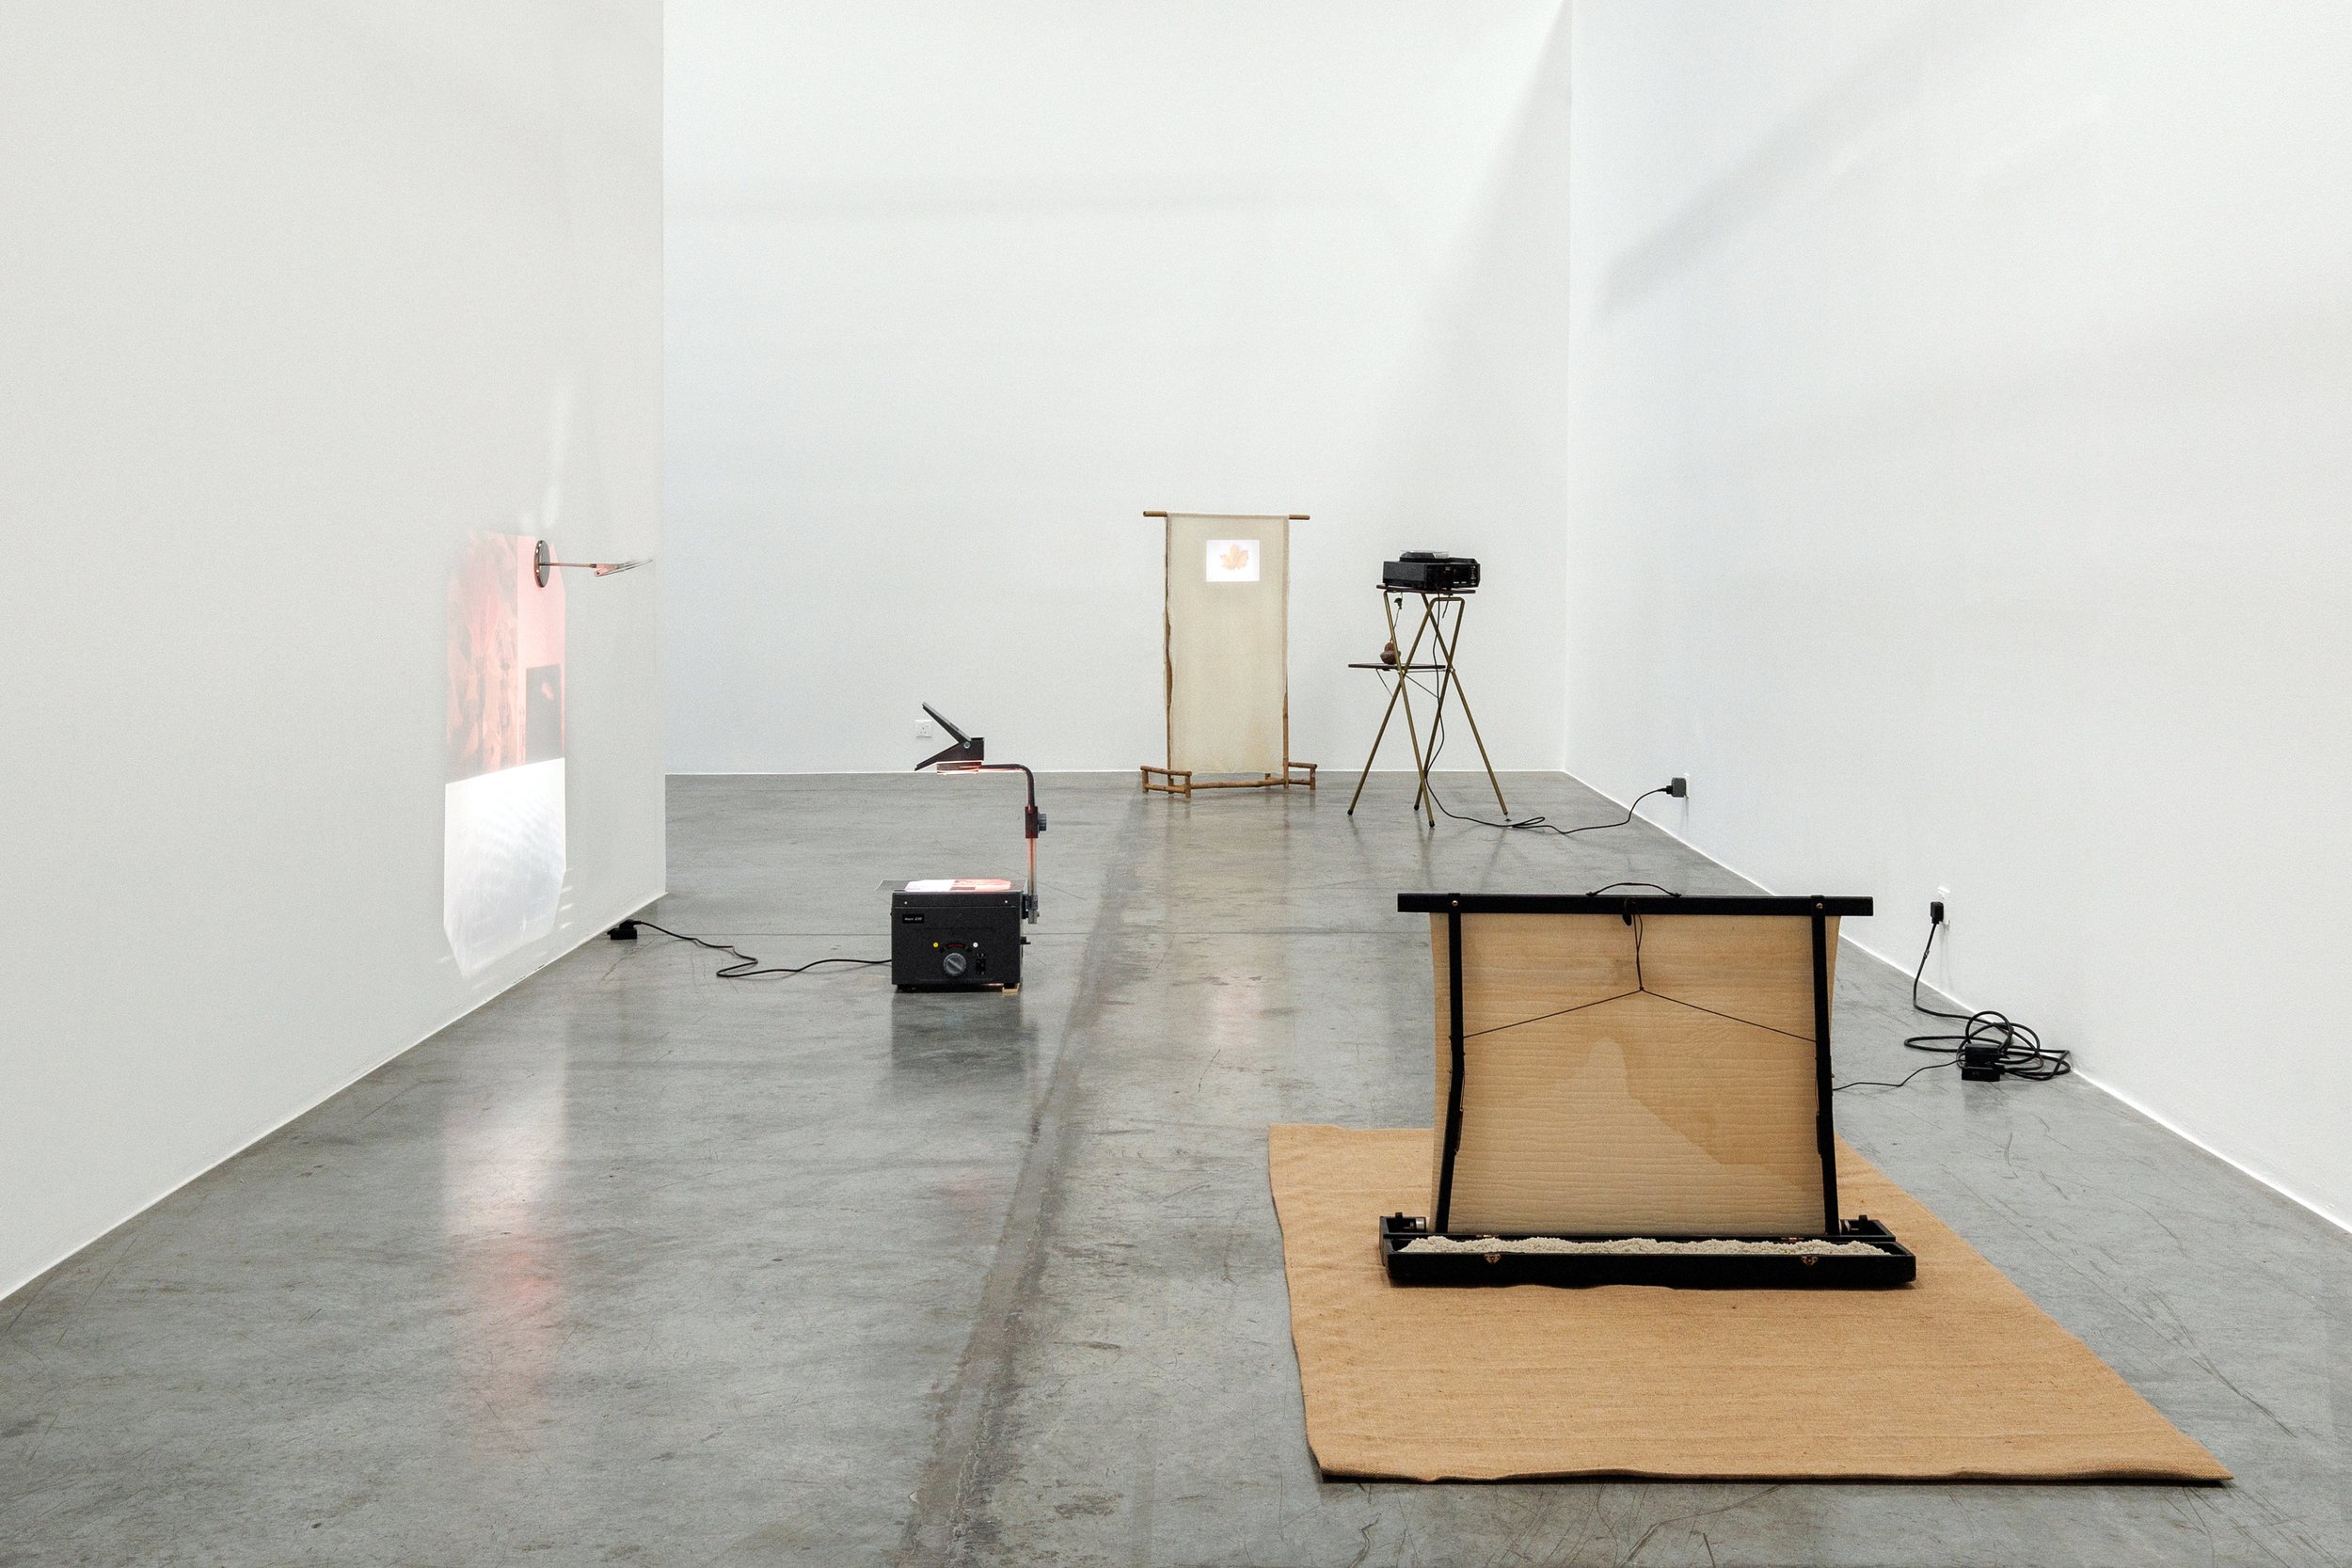  Installation view / Lament of a tree 